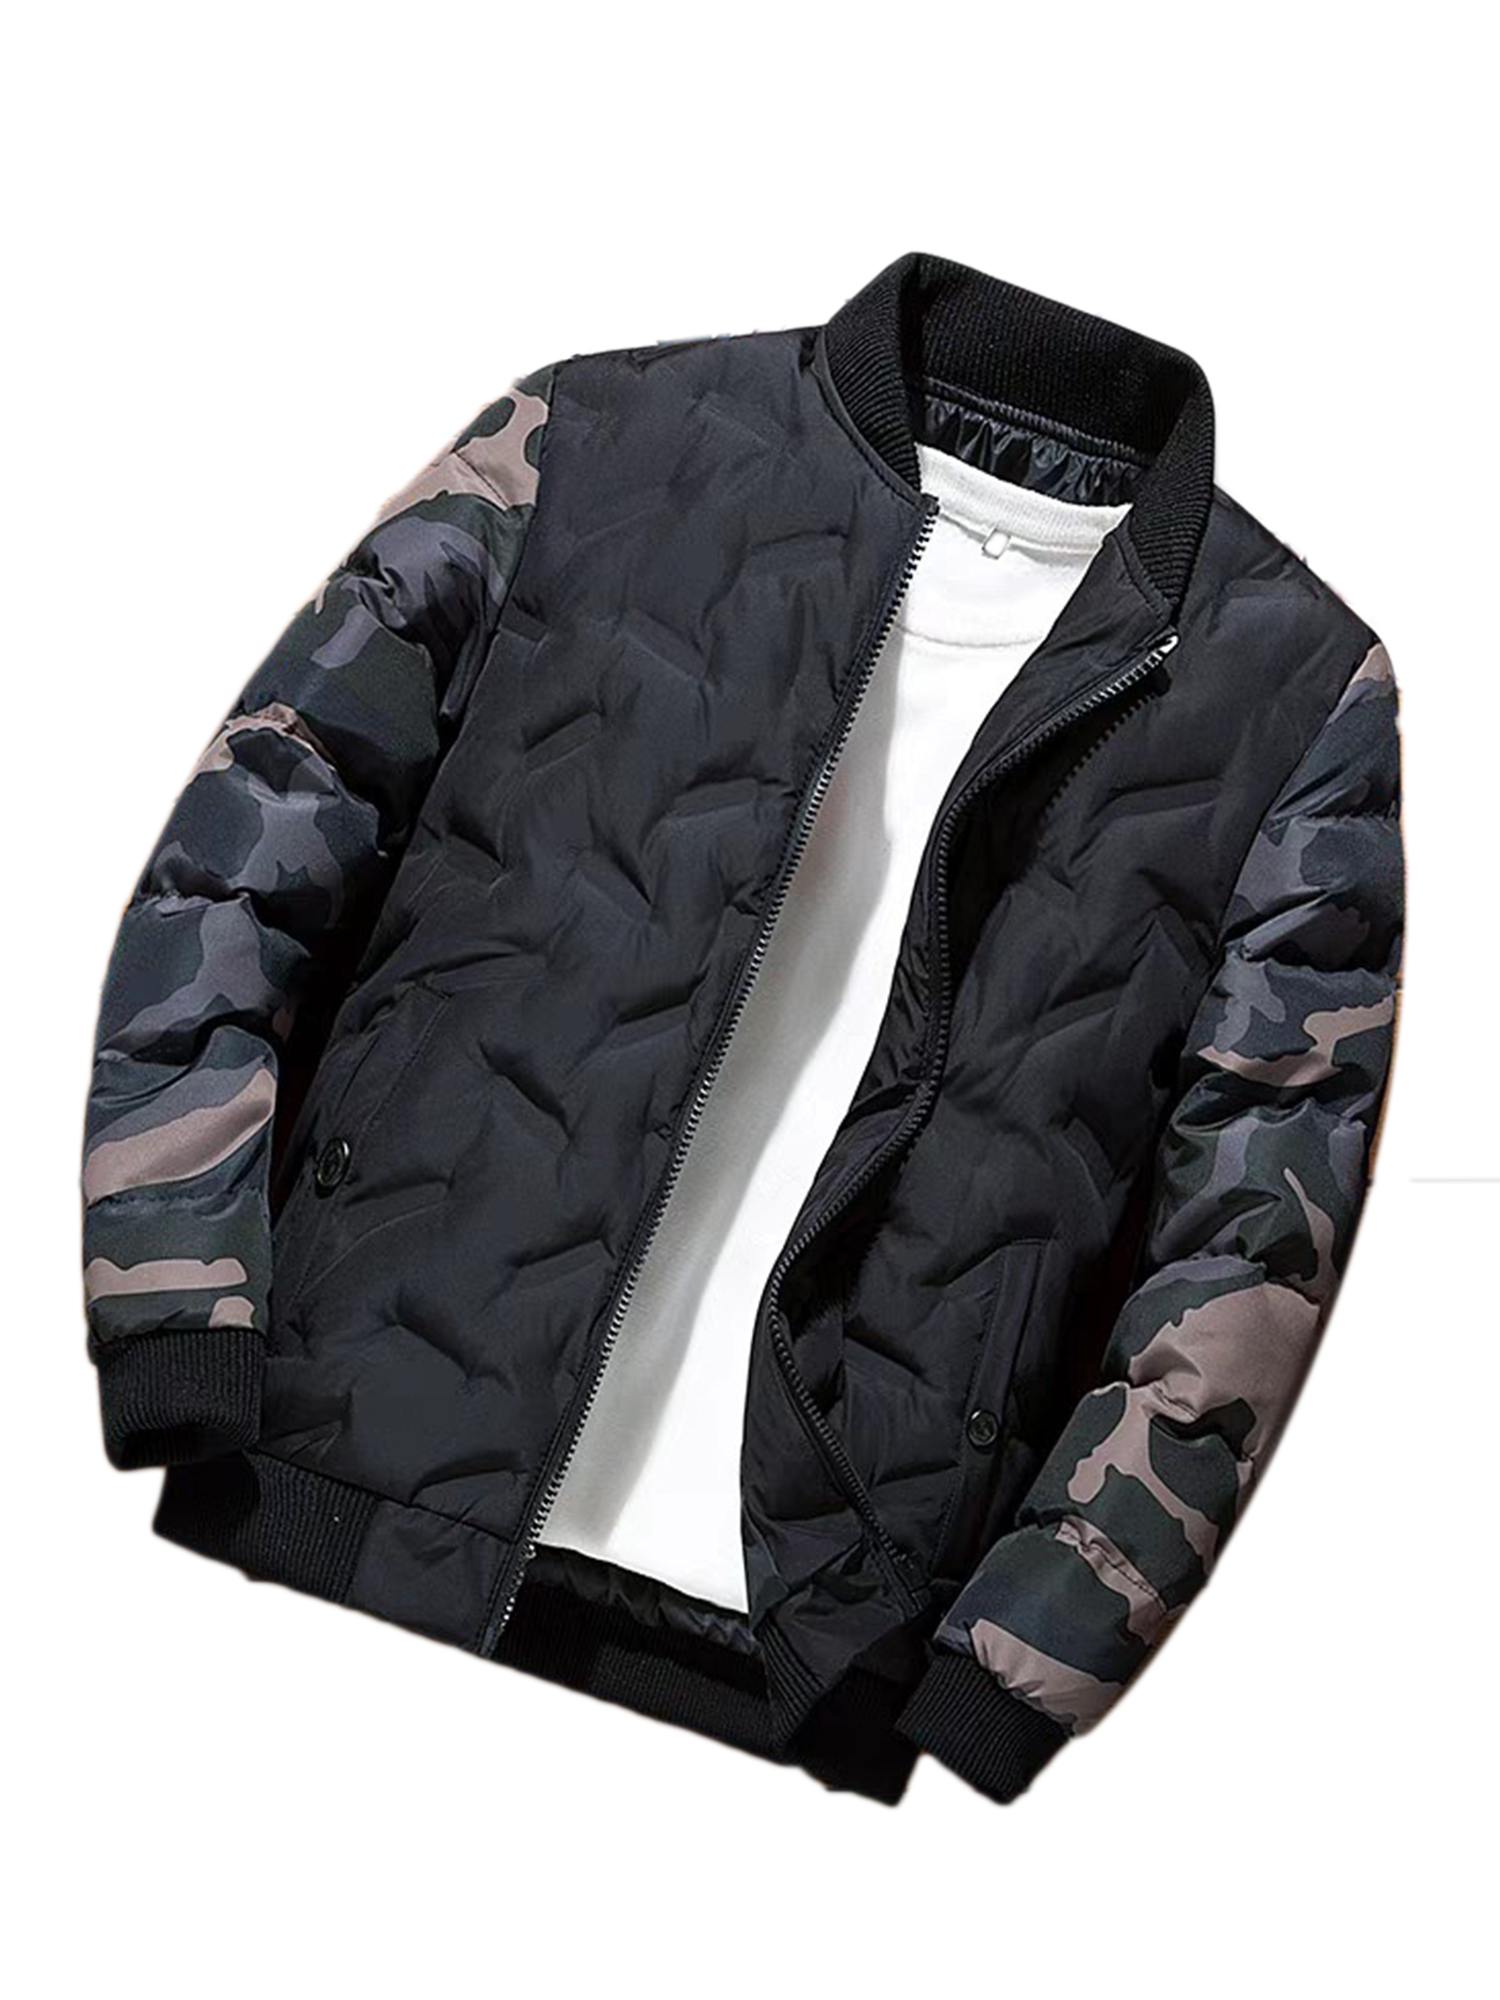 UKAP Mens Plus Size Insulated Letterman Jacket Thickened Varsity Jacket with Camo Sleeves Stand Collar for Winter Outerwear - image 1 of 6